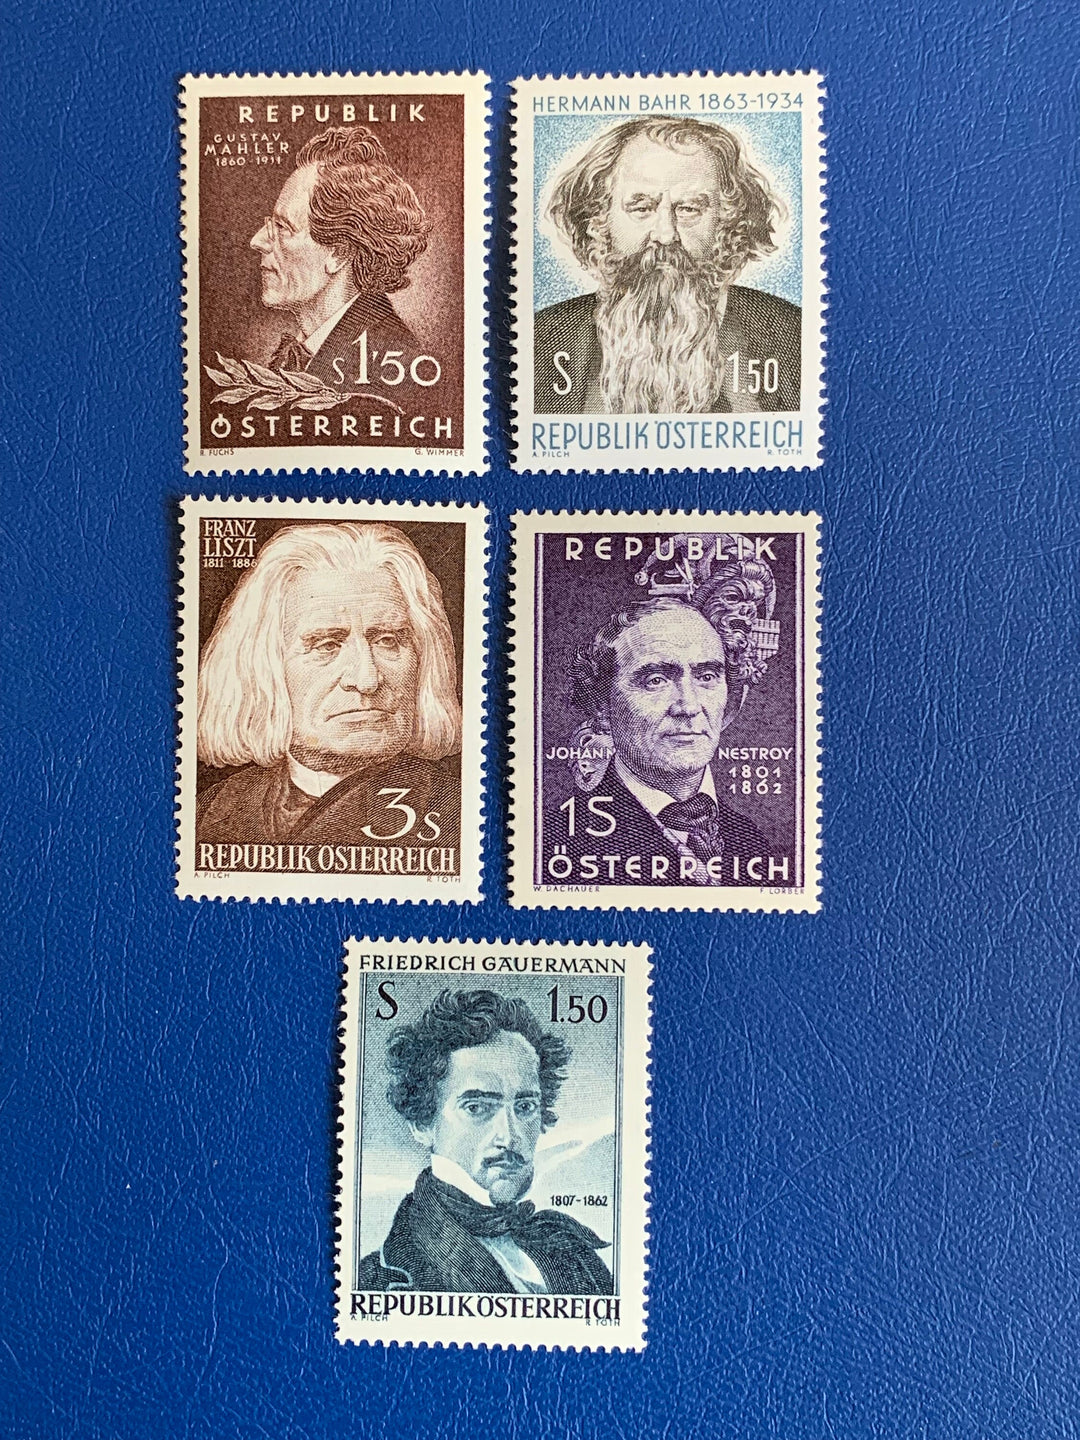 Austria - Original Vintage Postage Stamps - 1960-63 - Important figures in the Arts - for the collector, artist or crafter